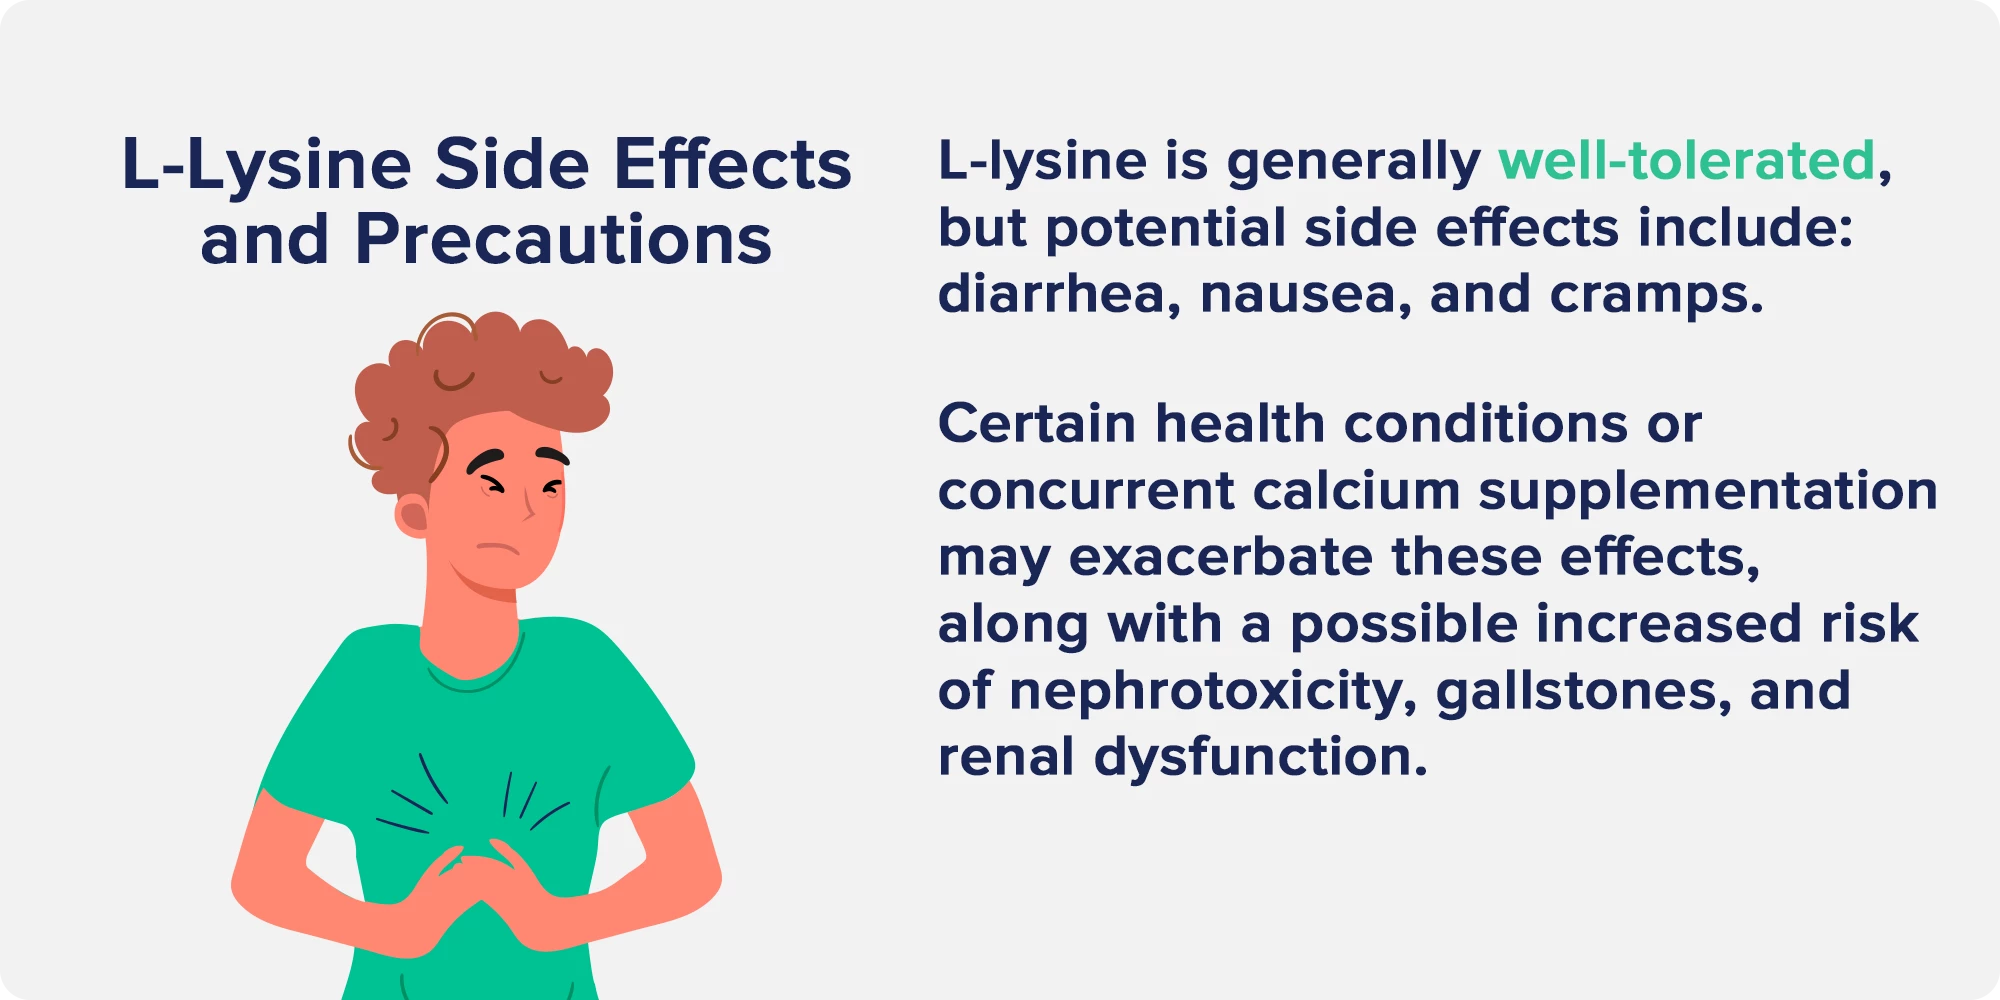 L-Lysine Side Effects and Precautions